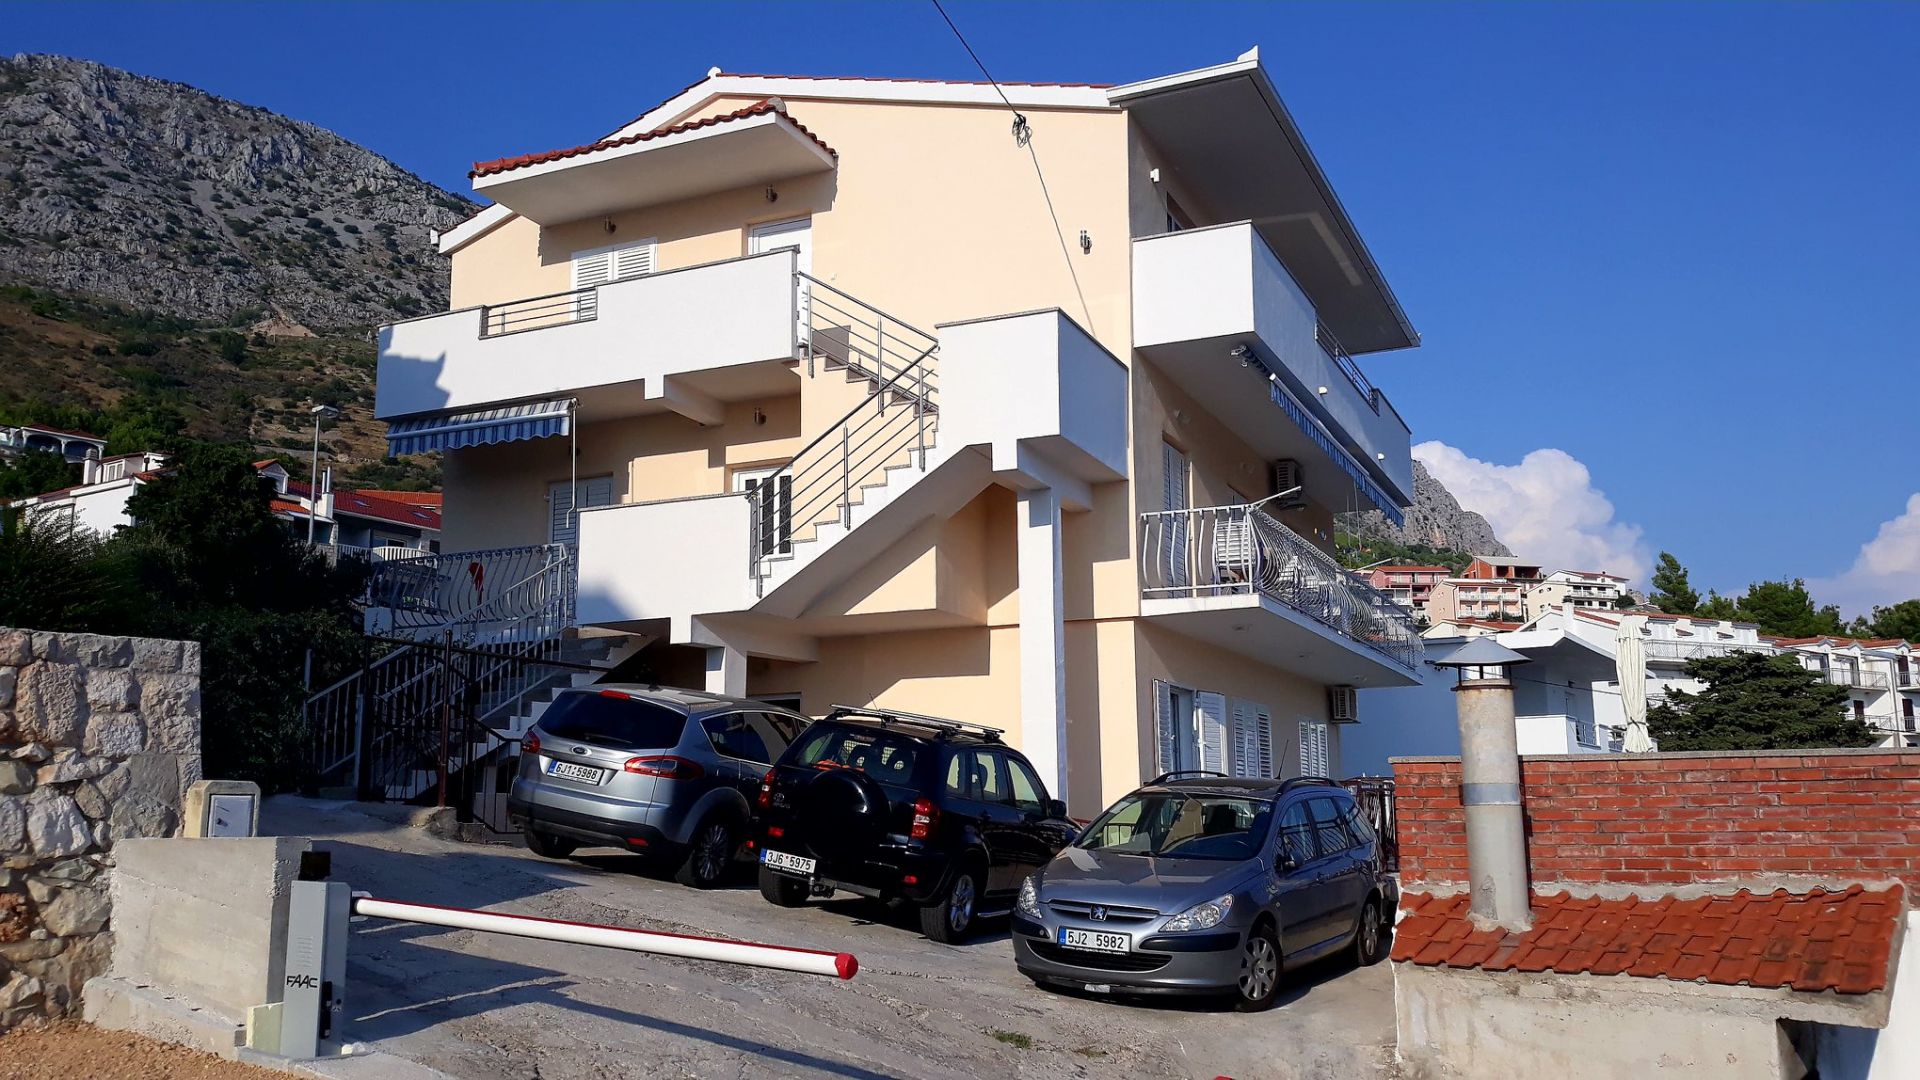 Apartments Sunset - 80 m from sea : A1-Veliki(8), A2-Mali(2+2) Stanici - Riviera Omis 